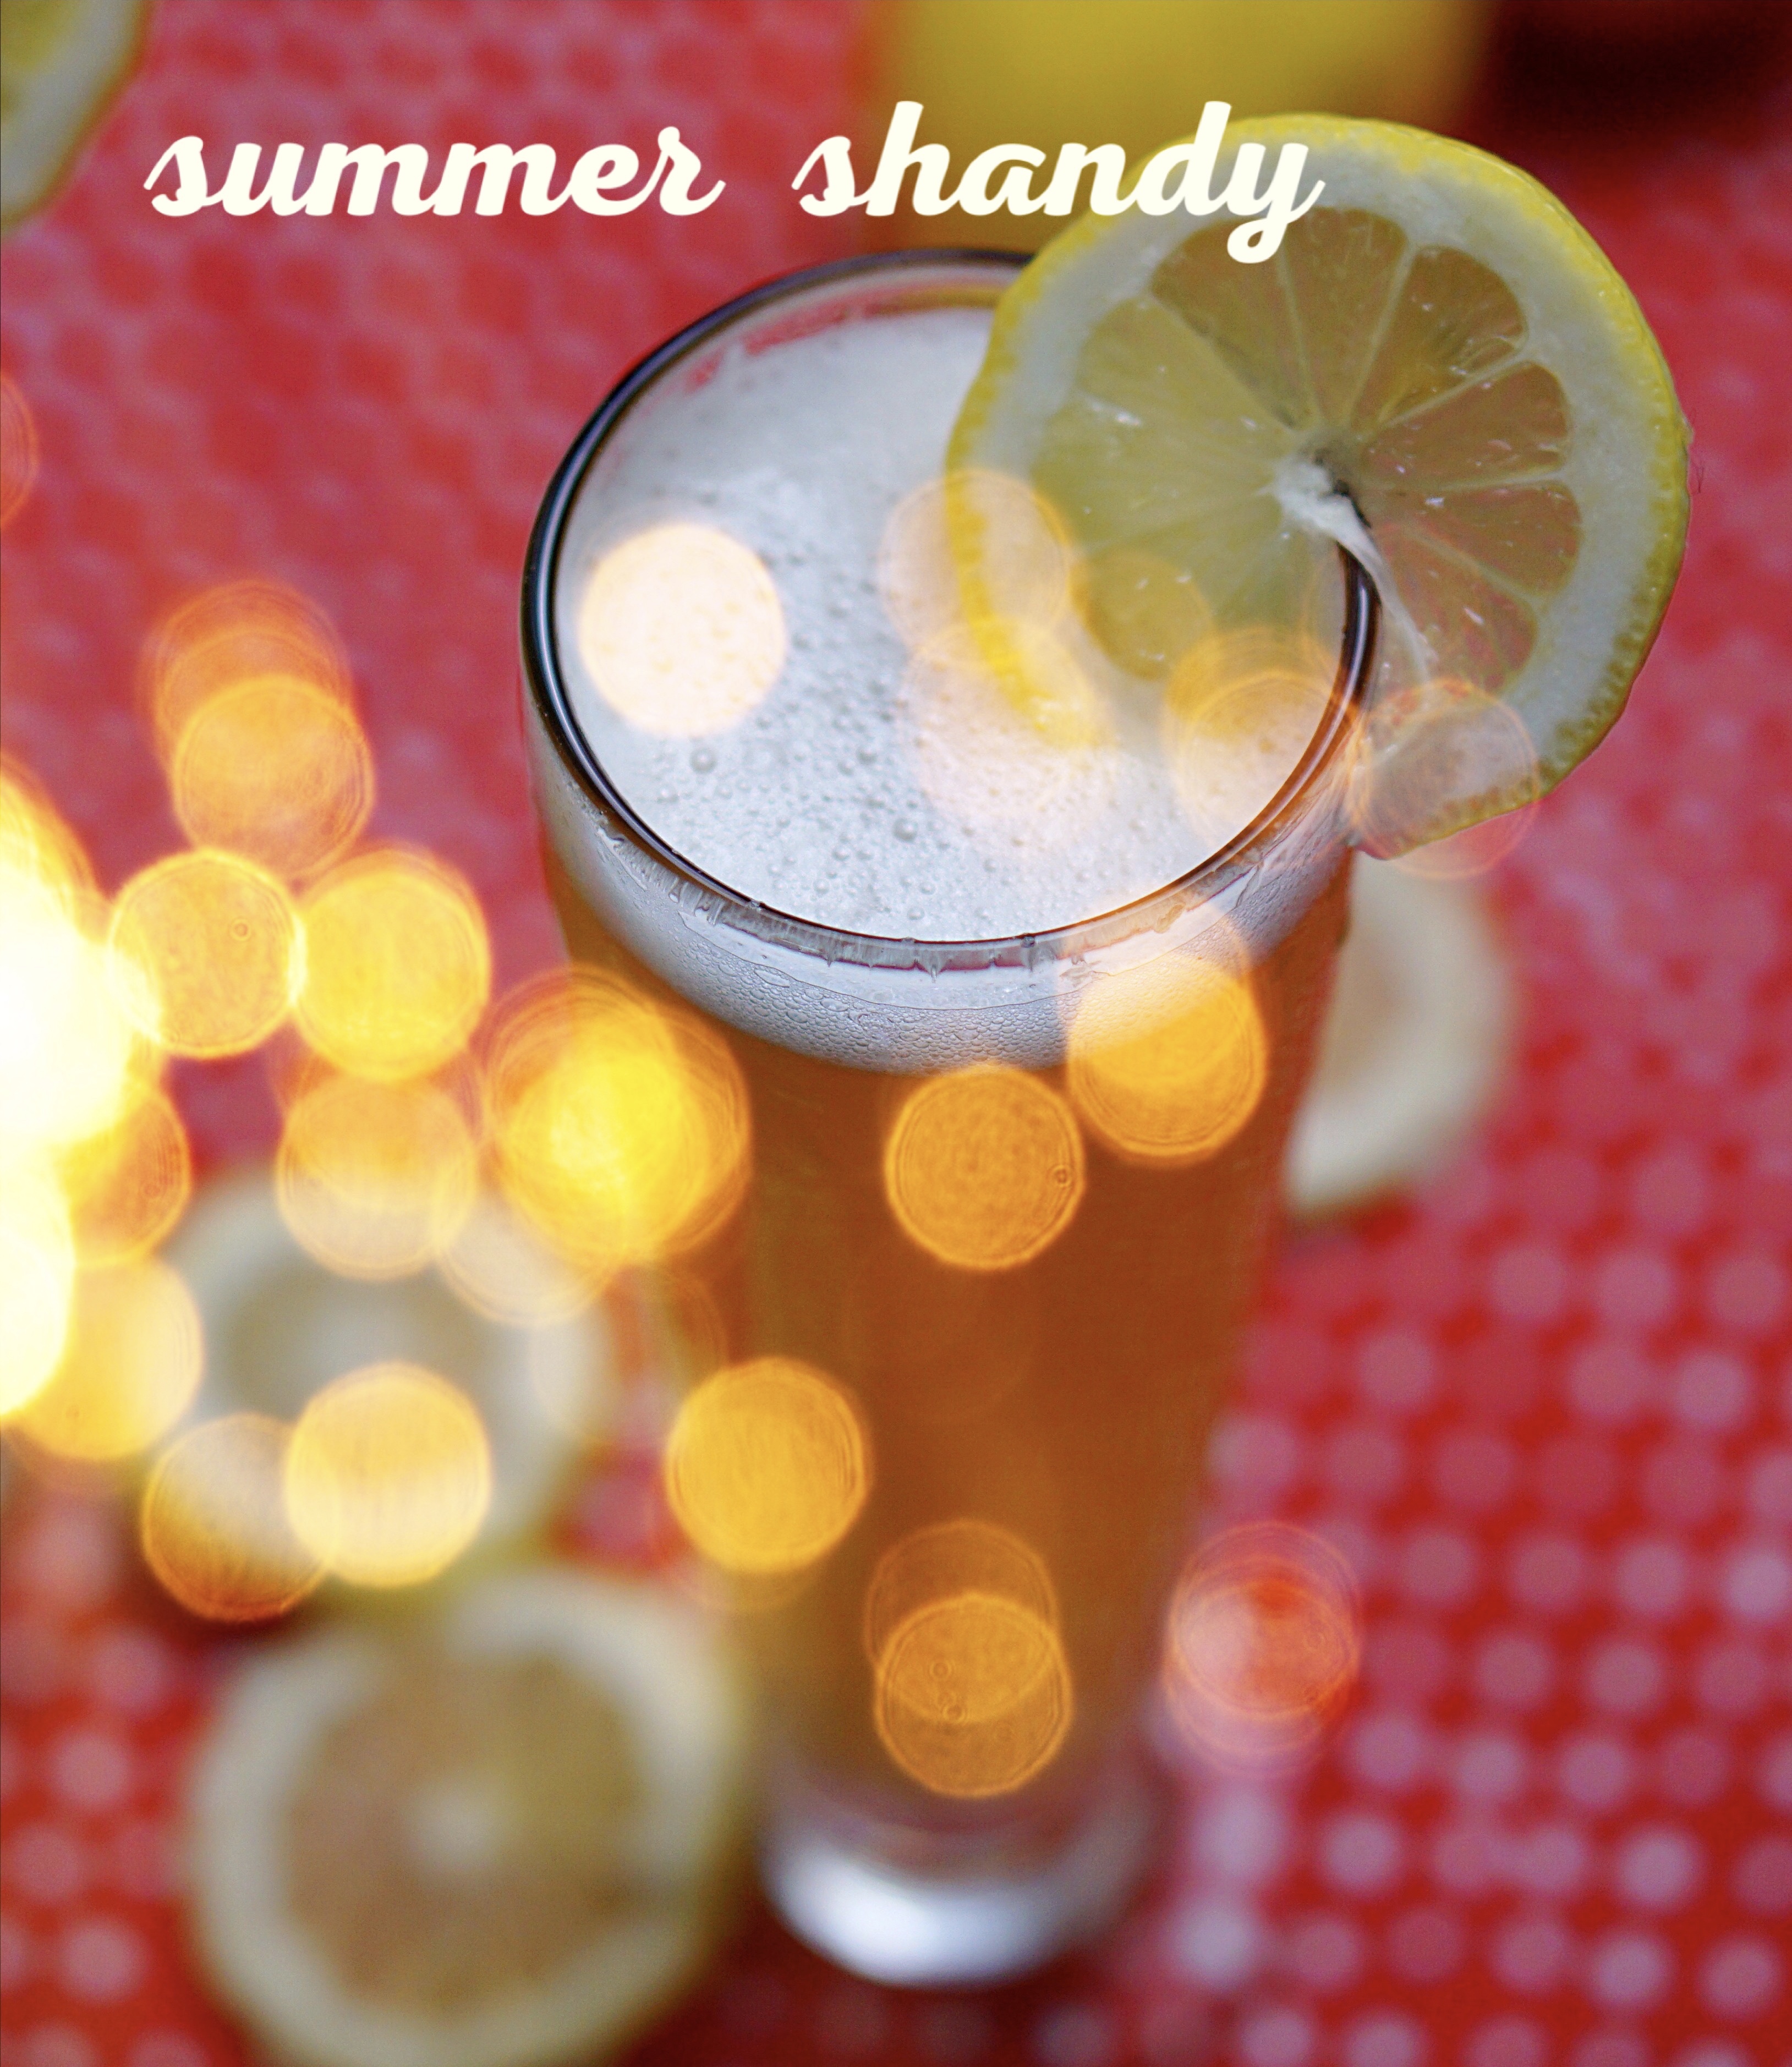 A perfect summer shandy is made with freshly squeezed sparkling lemonade and a tasty lager~By Wet Whistle Drinks by Darla Bentley